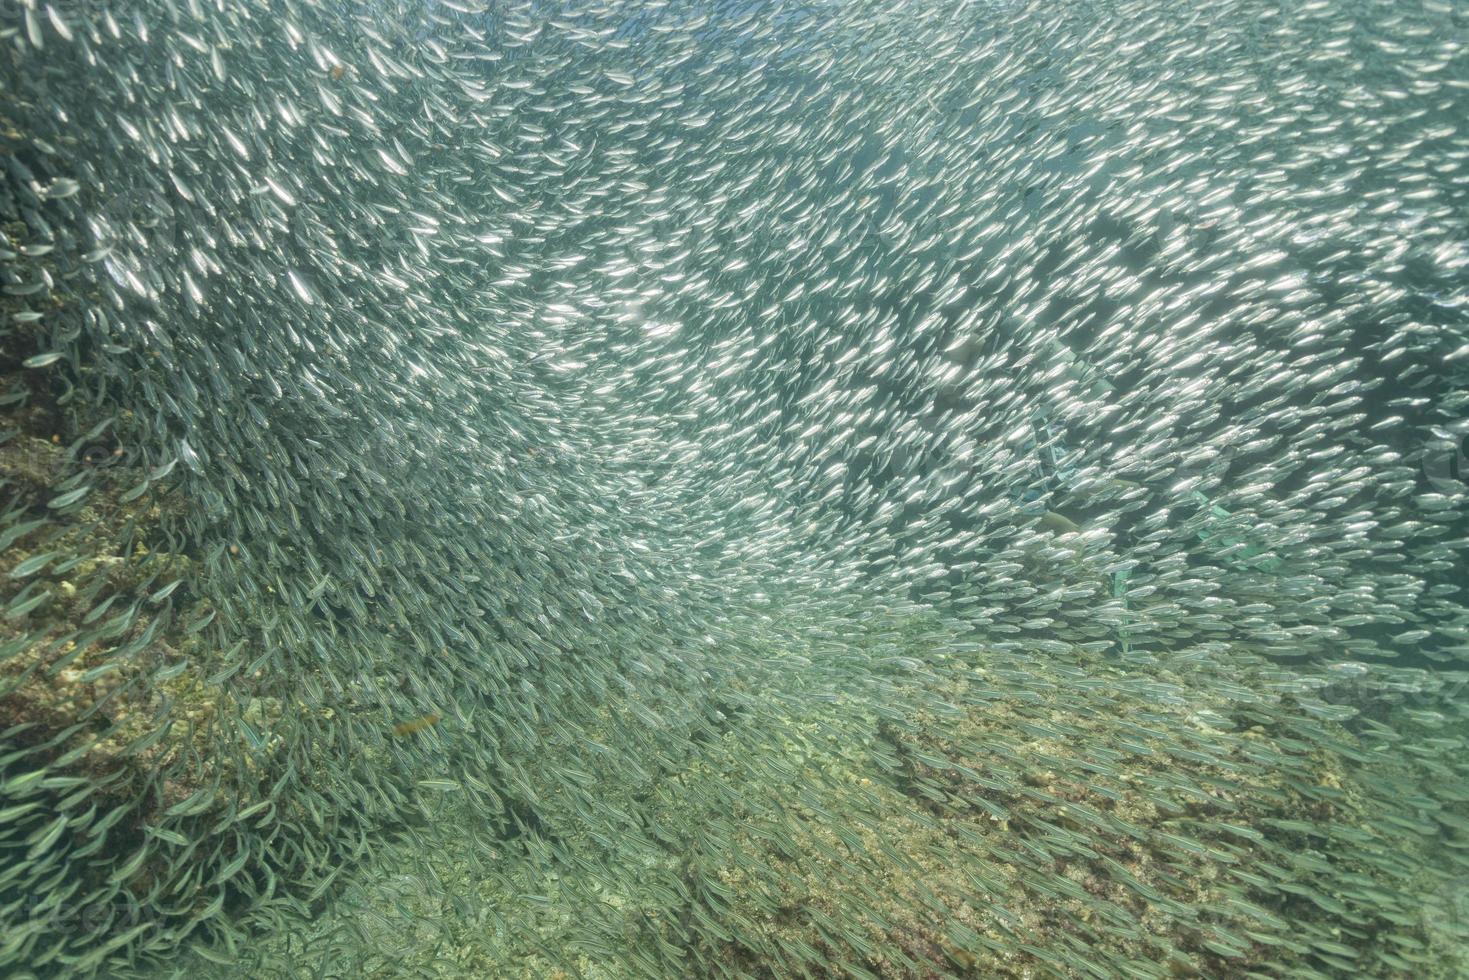 Inside a sardine school of fish close up in the deep blue sea photo